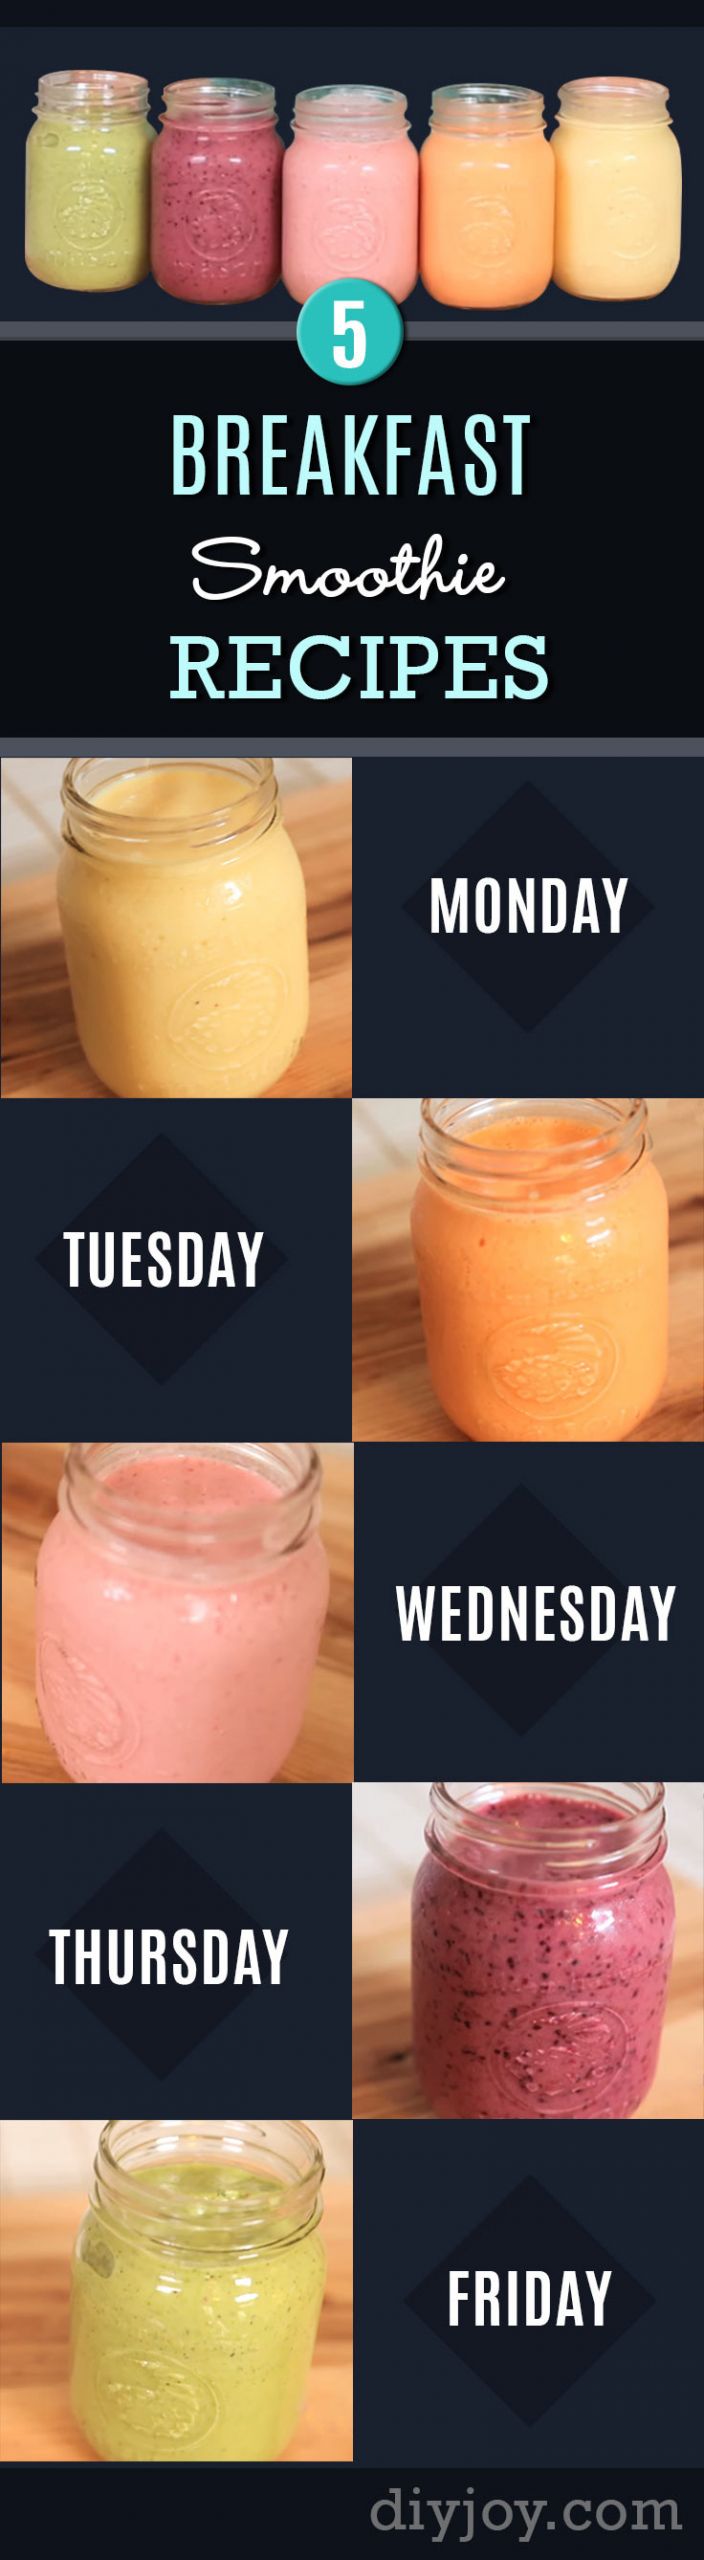 Low Calorie Smoothies Recipes For Weight Loss
 Monday to Friday 5 Breakfast Smoothie Recipes